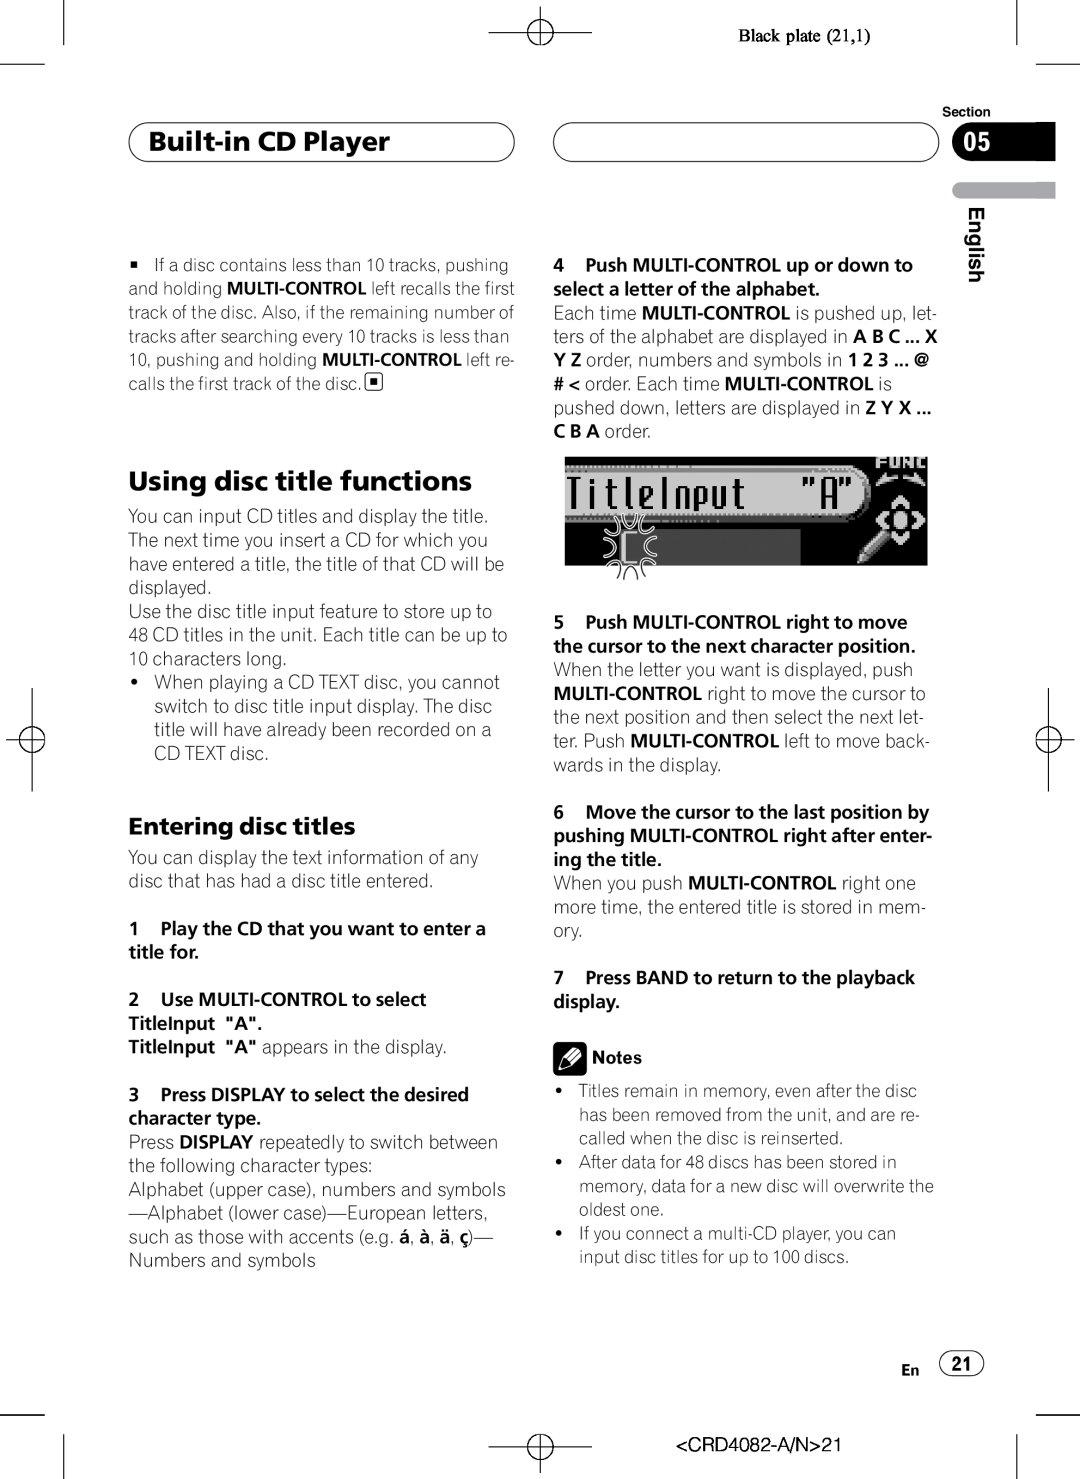 Pioneer DEH-P80RS operation manual Using disc title functions, Entering disc titles, Built-inCD Player 